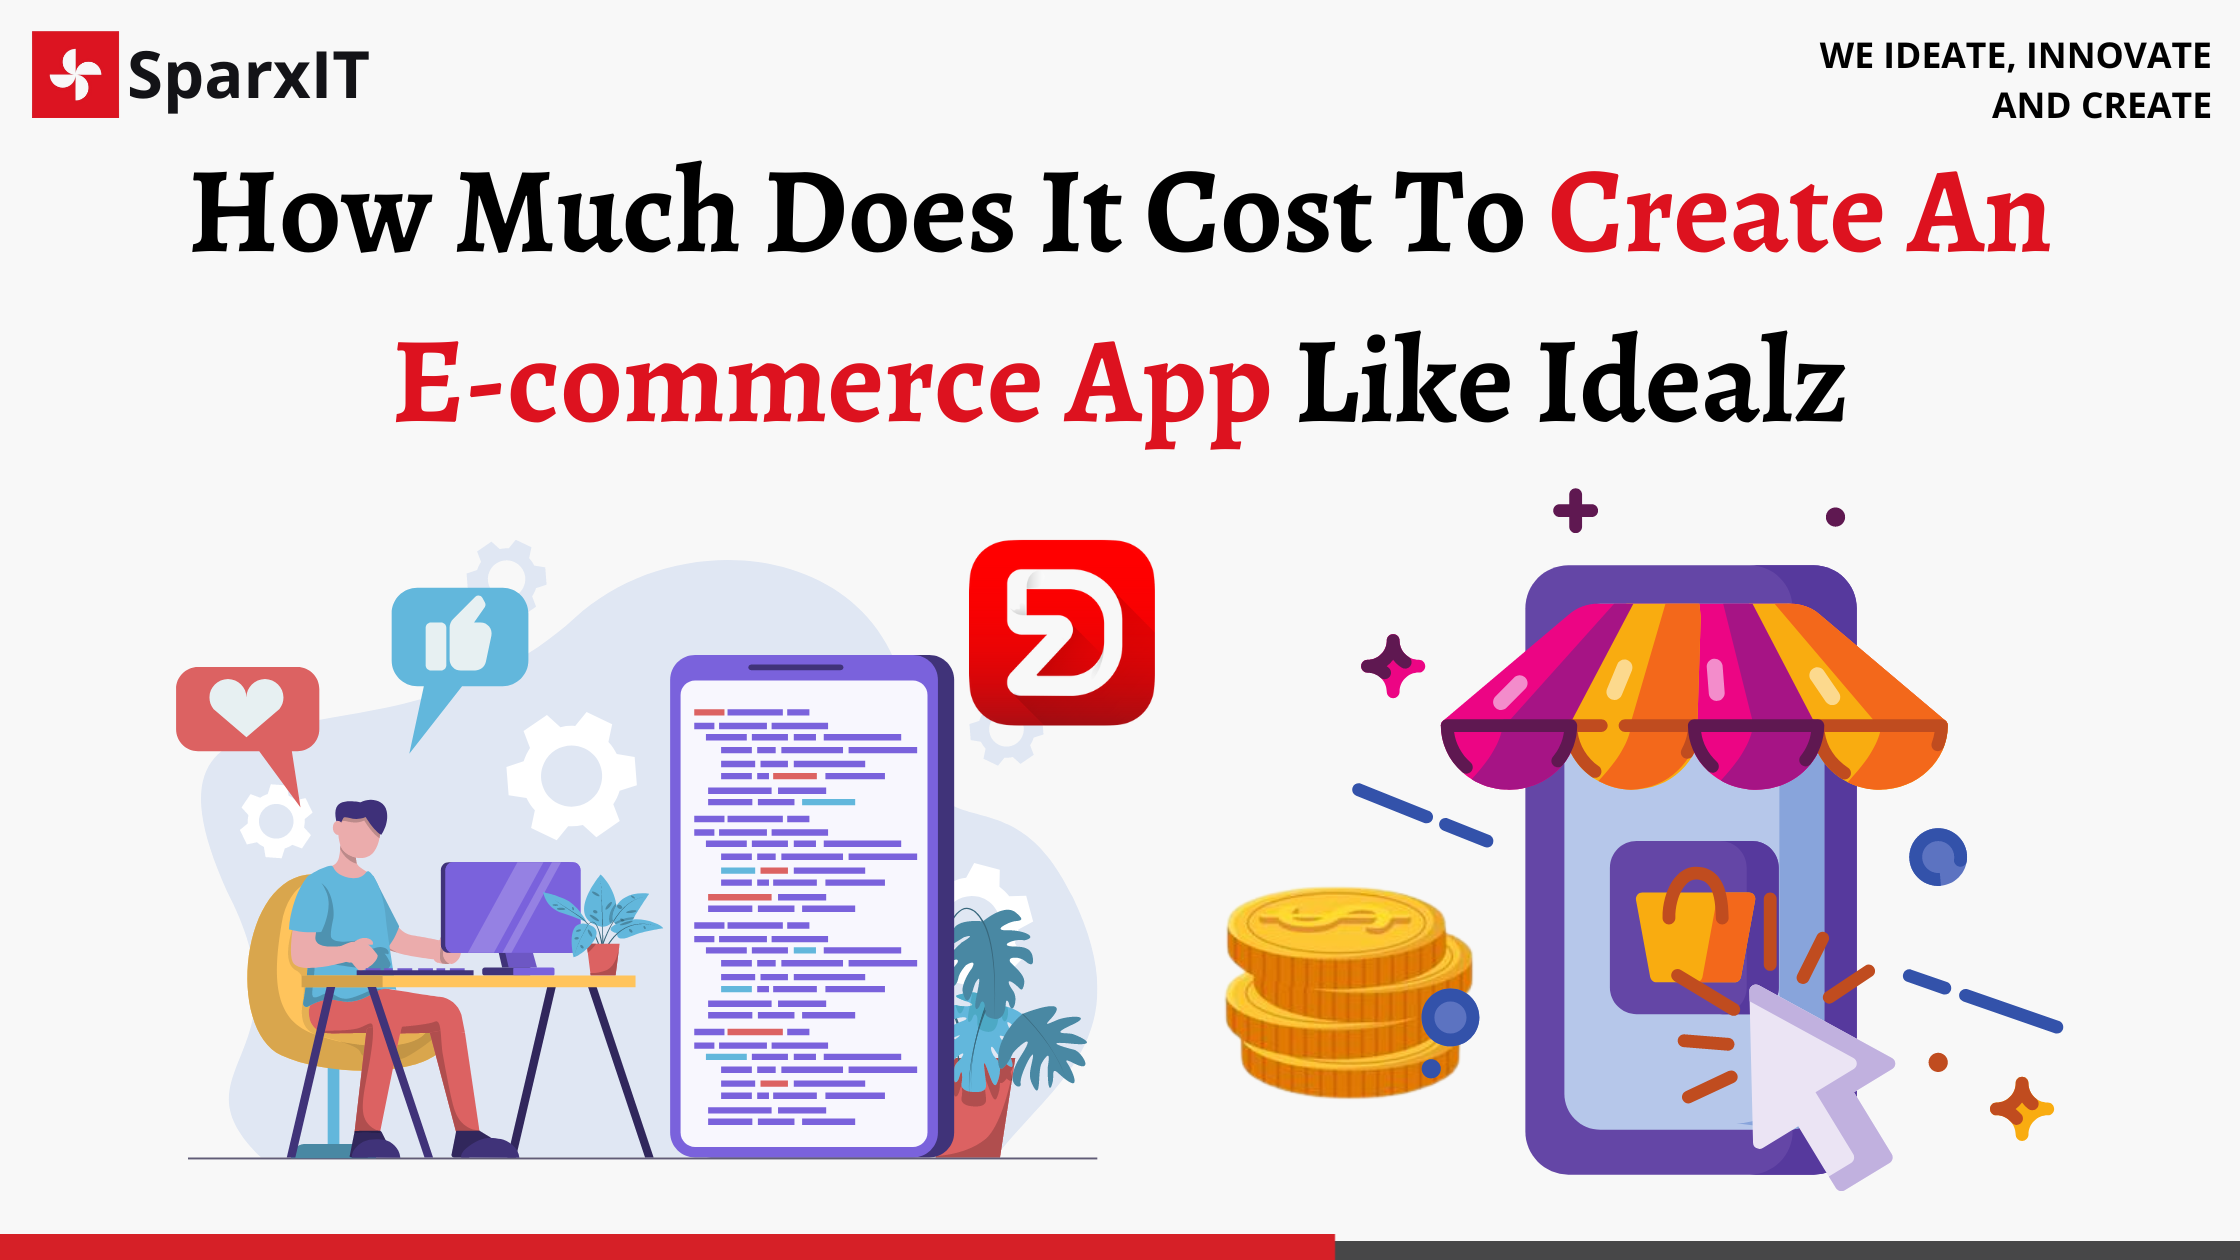 How Much Does It Cost To Create An E-commerce App Like Idealz?